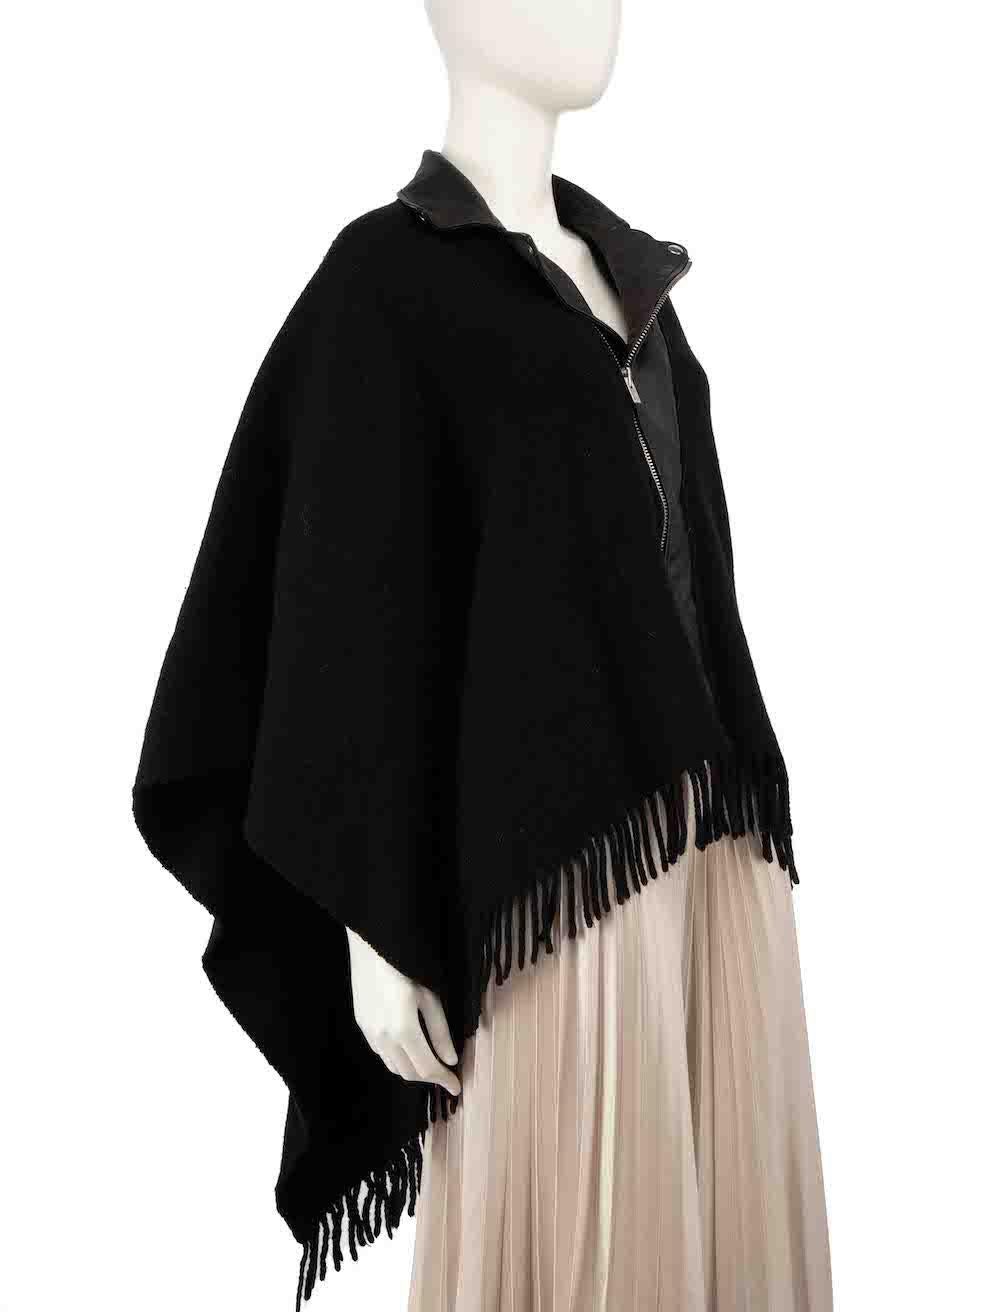 CONDITION is Very good. Hardly any visible wear to poncho is evident on this used The Kooples designer resale item.
 
 
 
 Details
 
 
 Black
 
 Wool
 
 Poncho
 
 Leather collar trim
 
 Zip fastening
 
 Fringe hem
 
 
 
 
 
 Made in Italy
 
 
 
